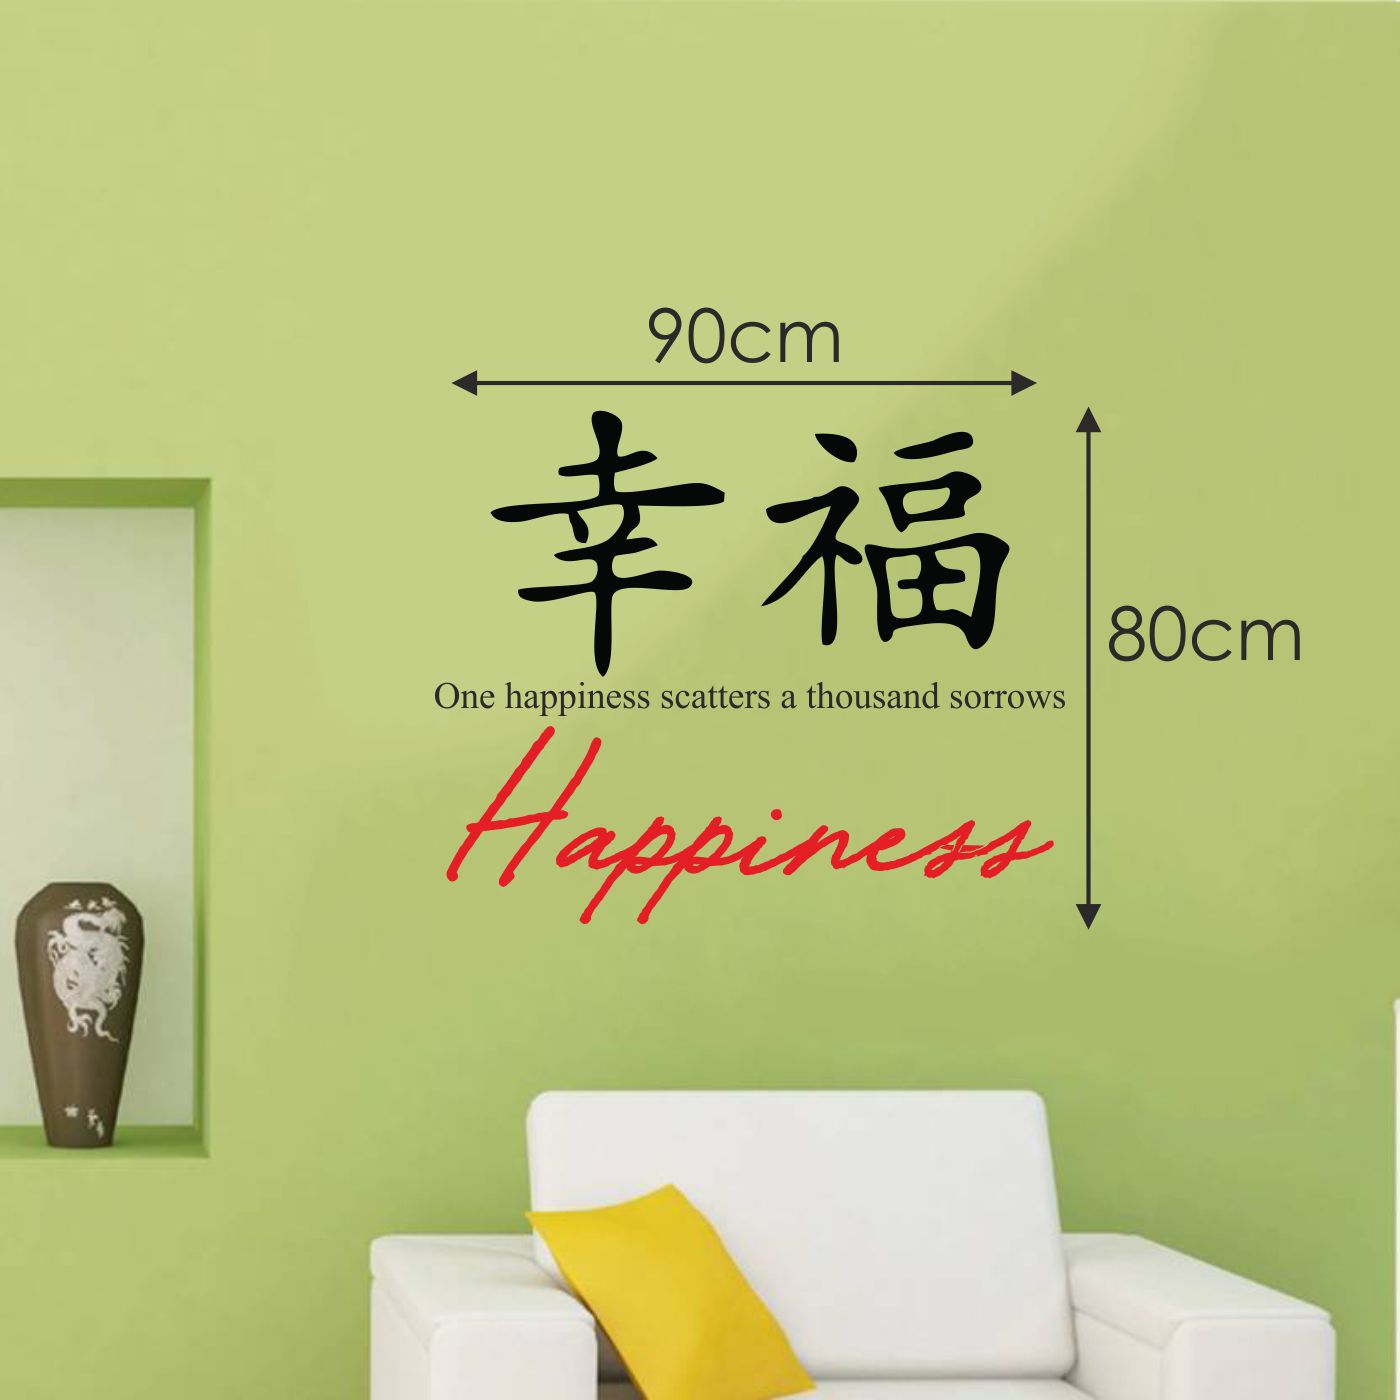 ORKA Chinese Wall Decal Sticker 21  